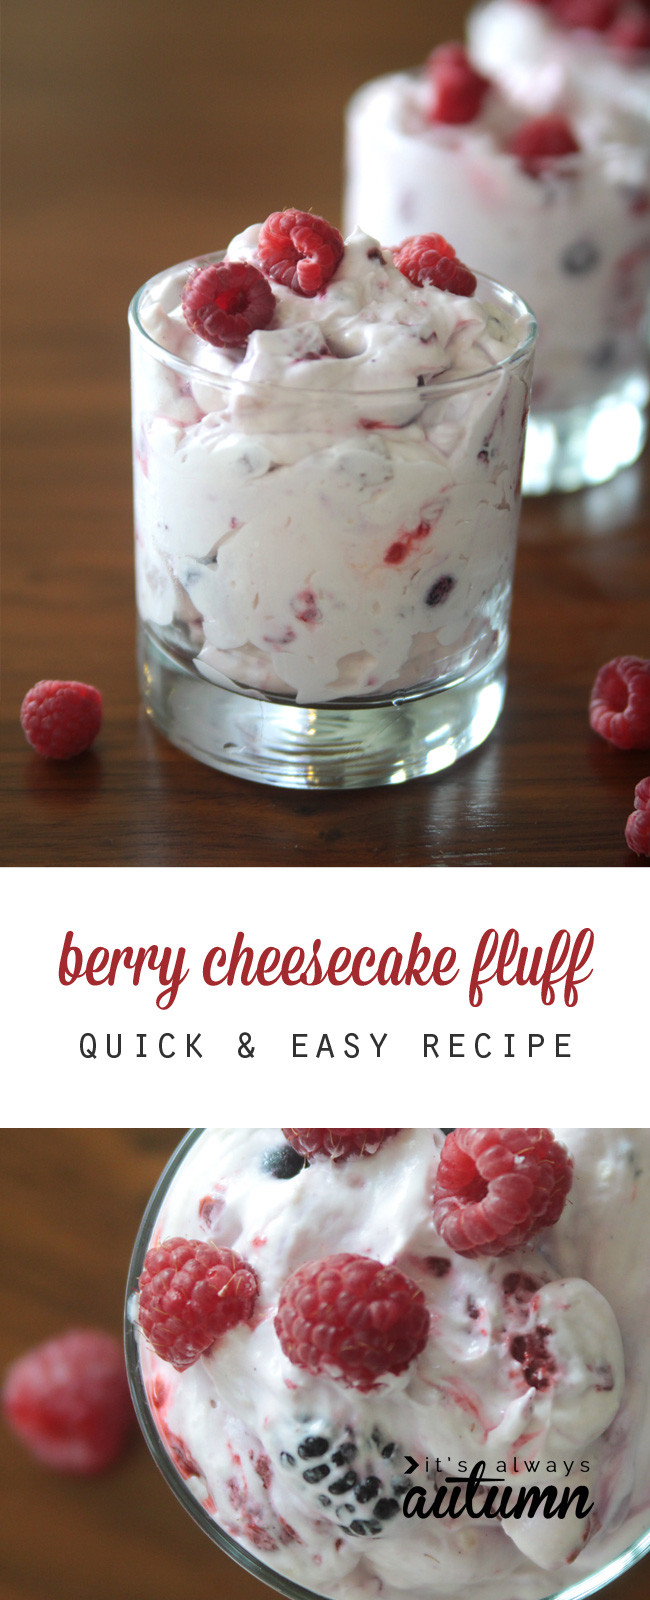 Easy Christmas Desserts Recipes
 berry cheesecake fluff a lighter holiday dessert It s